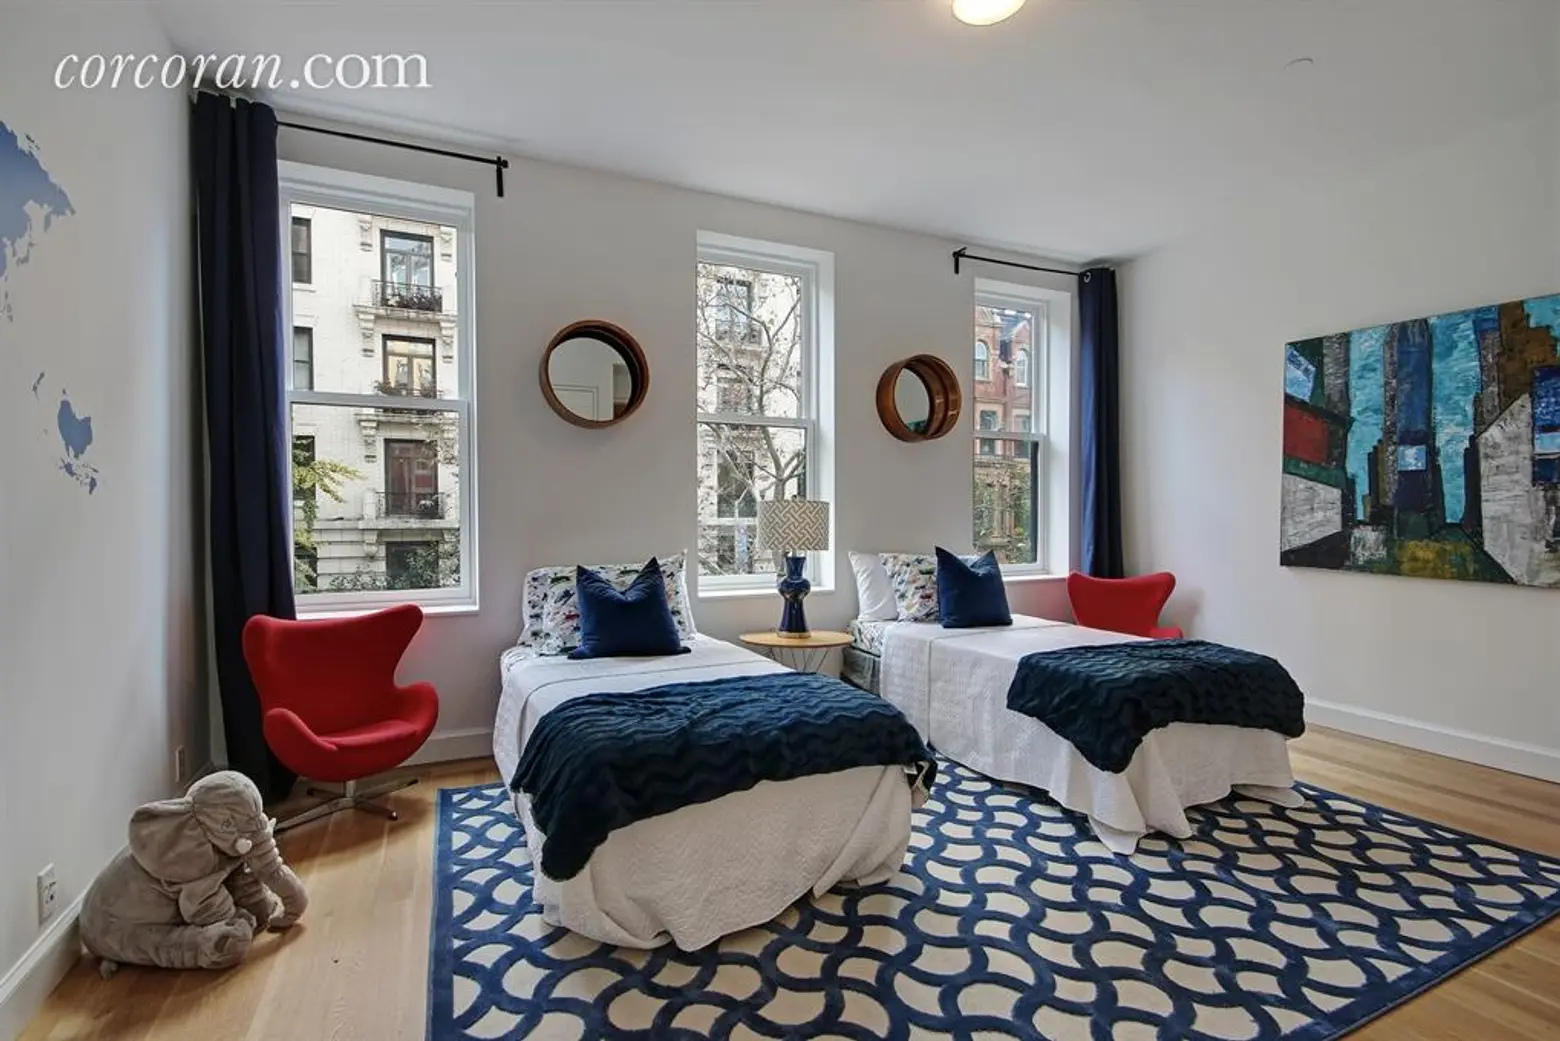 51 West 83rd Street, Townhouse, Upper West Side, Manhattan townhouse for sale, private pool, renovation, cool listings,